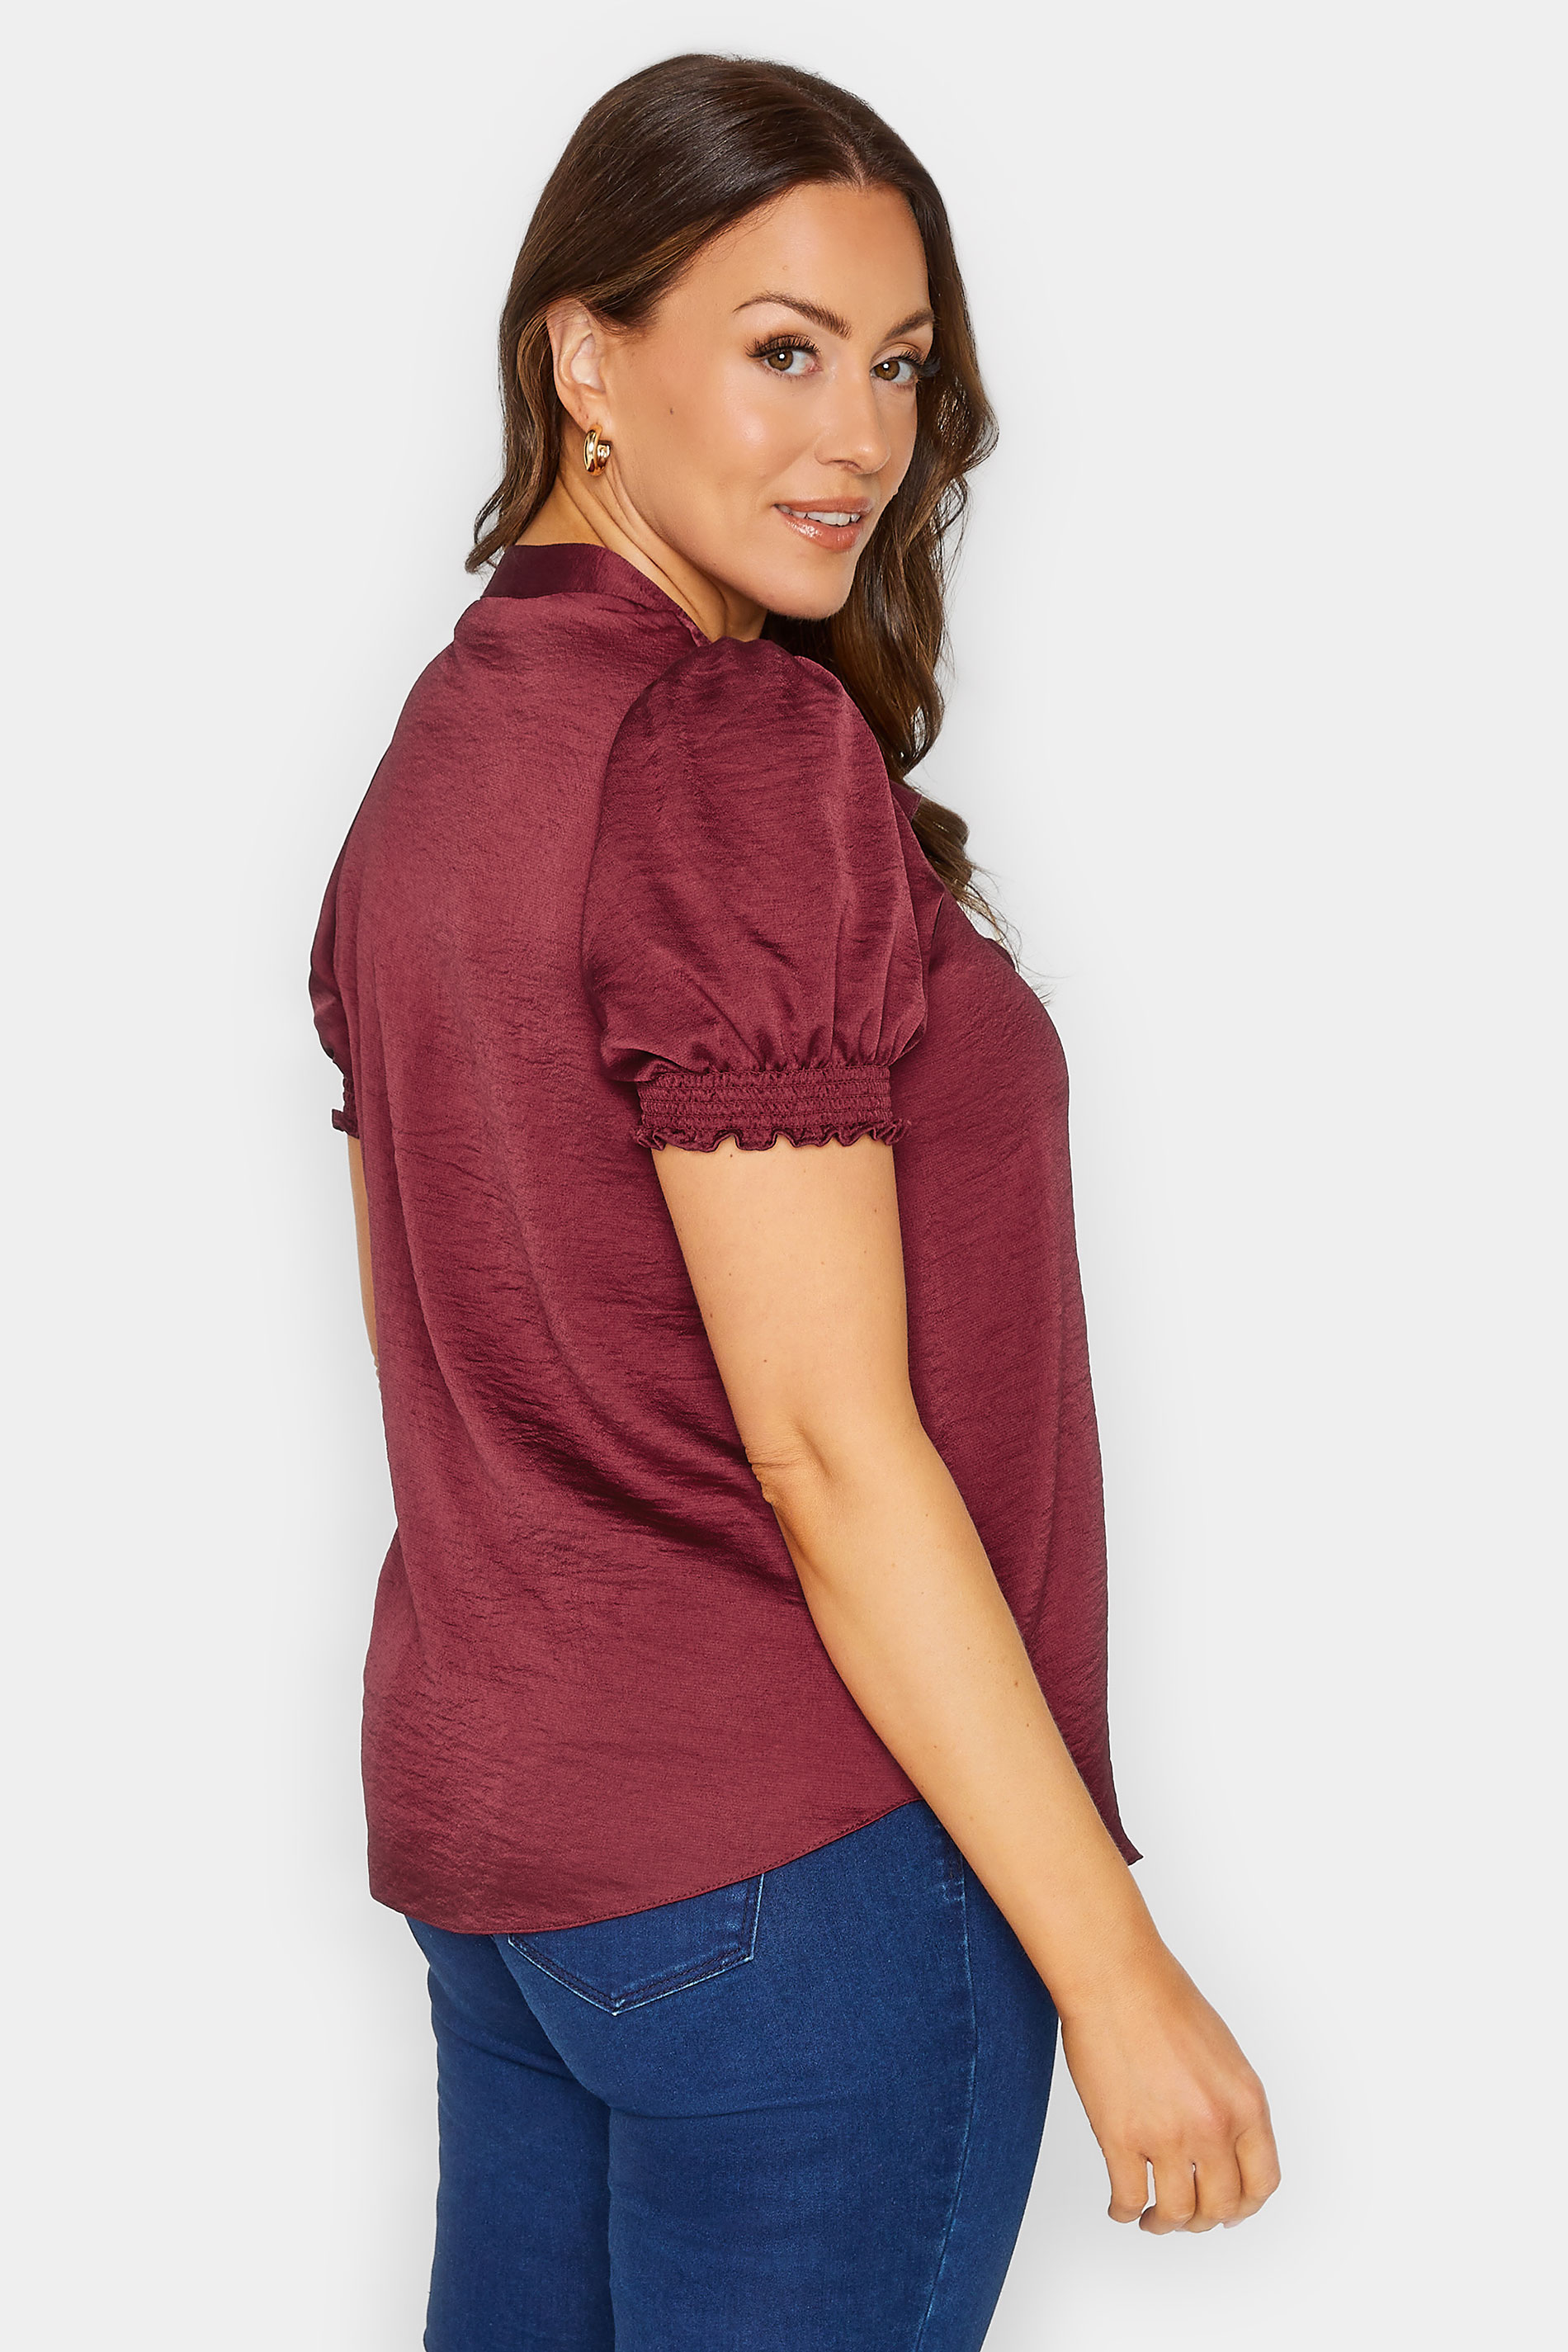 M&Co Burgundy Red Frill Satin Blouse | M&Co 3